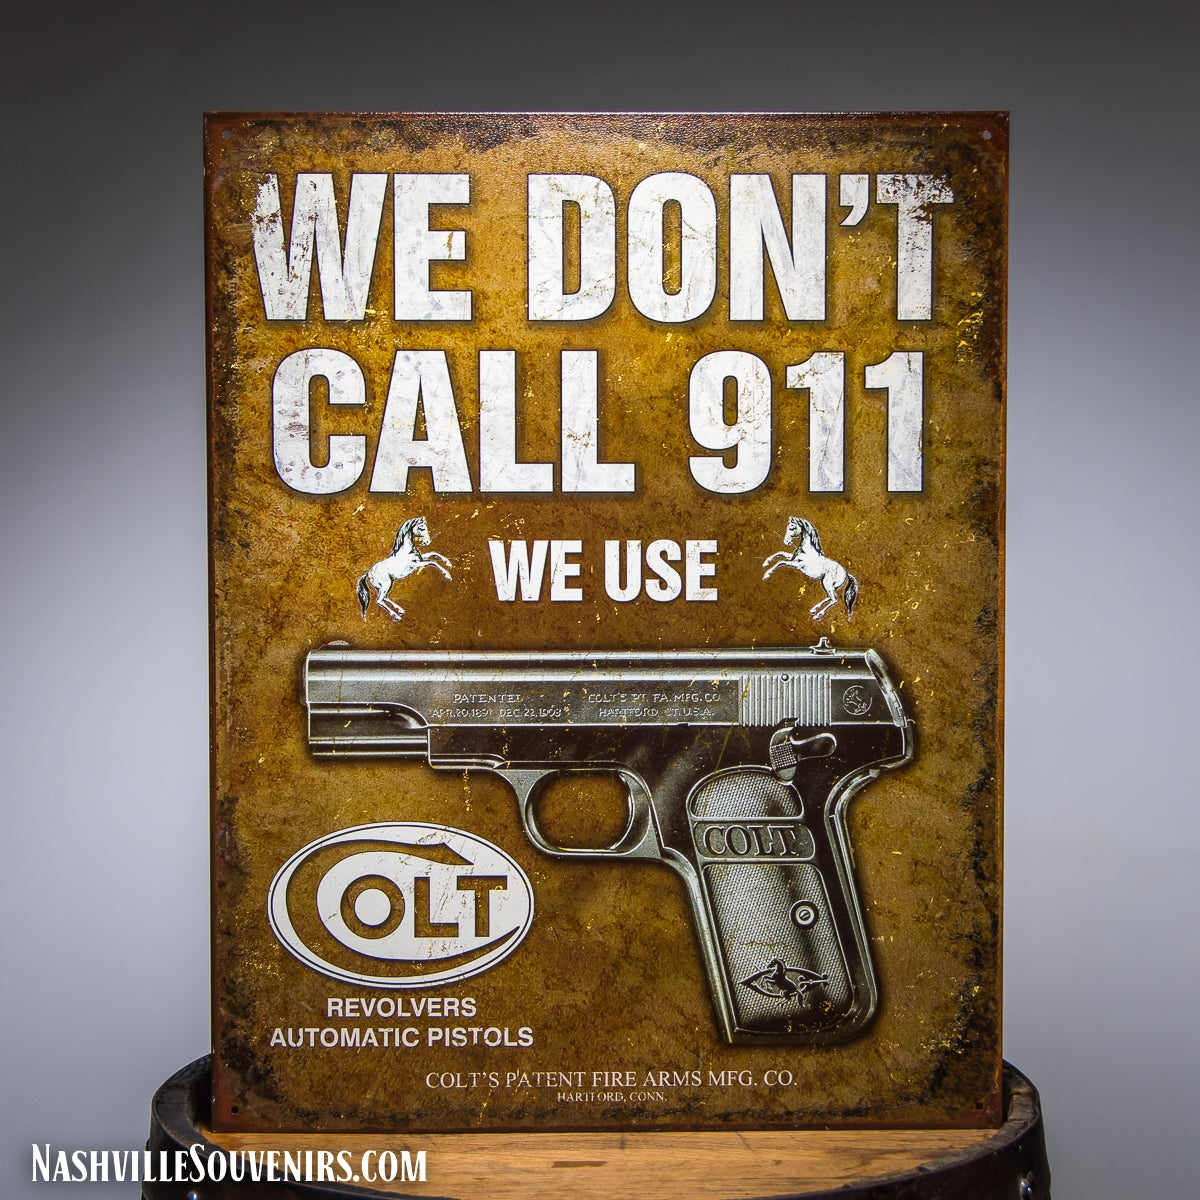 We Don't Dial 911 we use COLT Pistols Tin Sign